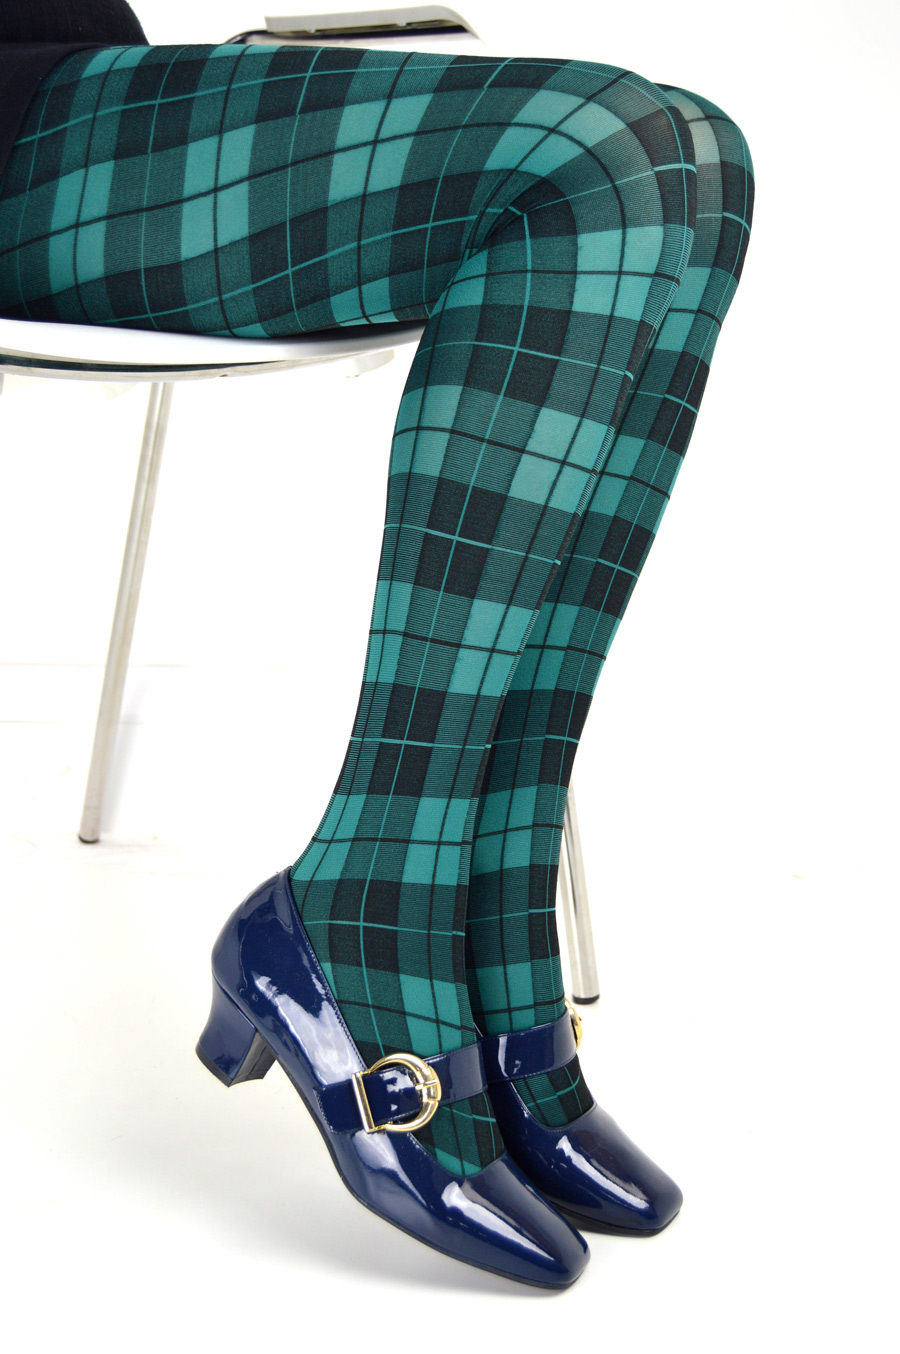 4 Styles Of Scottish Tartan / Argyle Print Tights Available (Made In Italy)